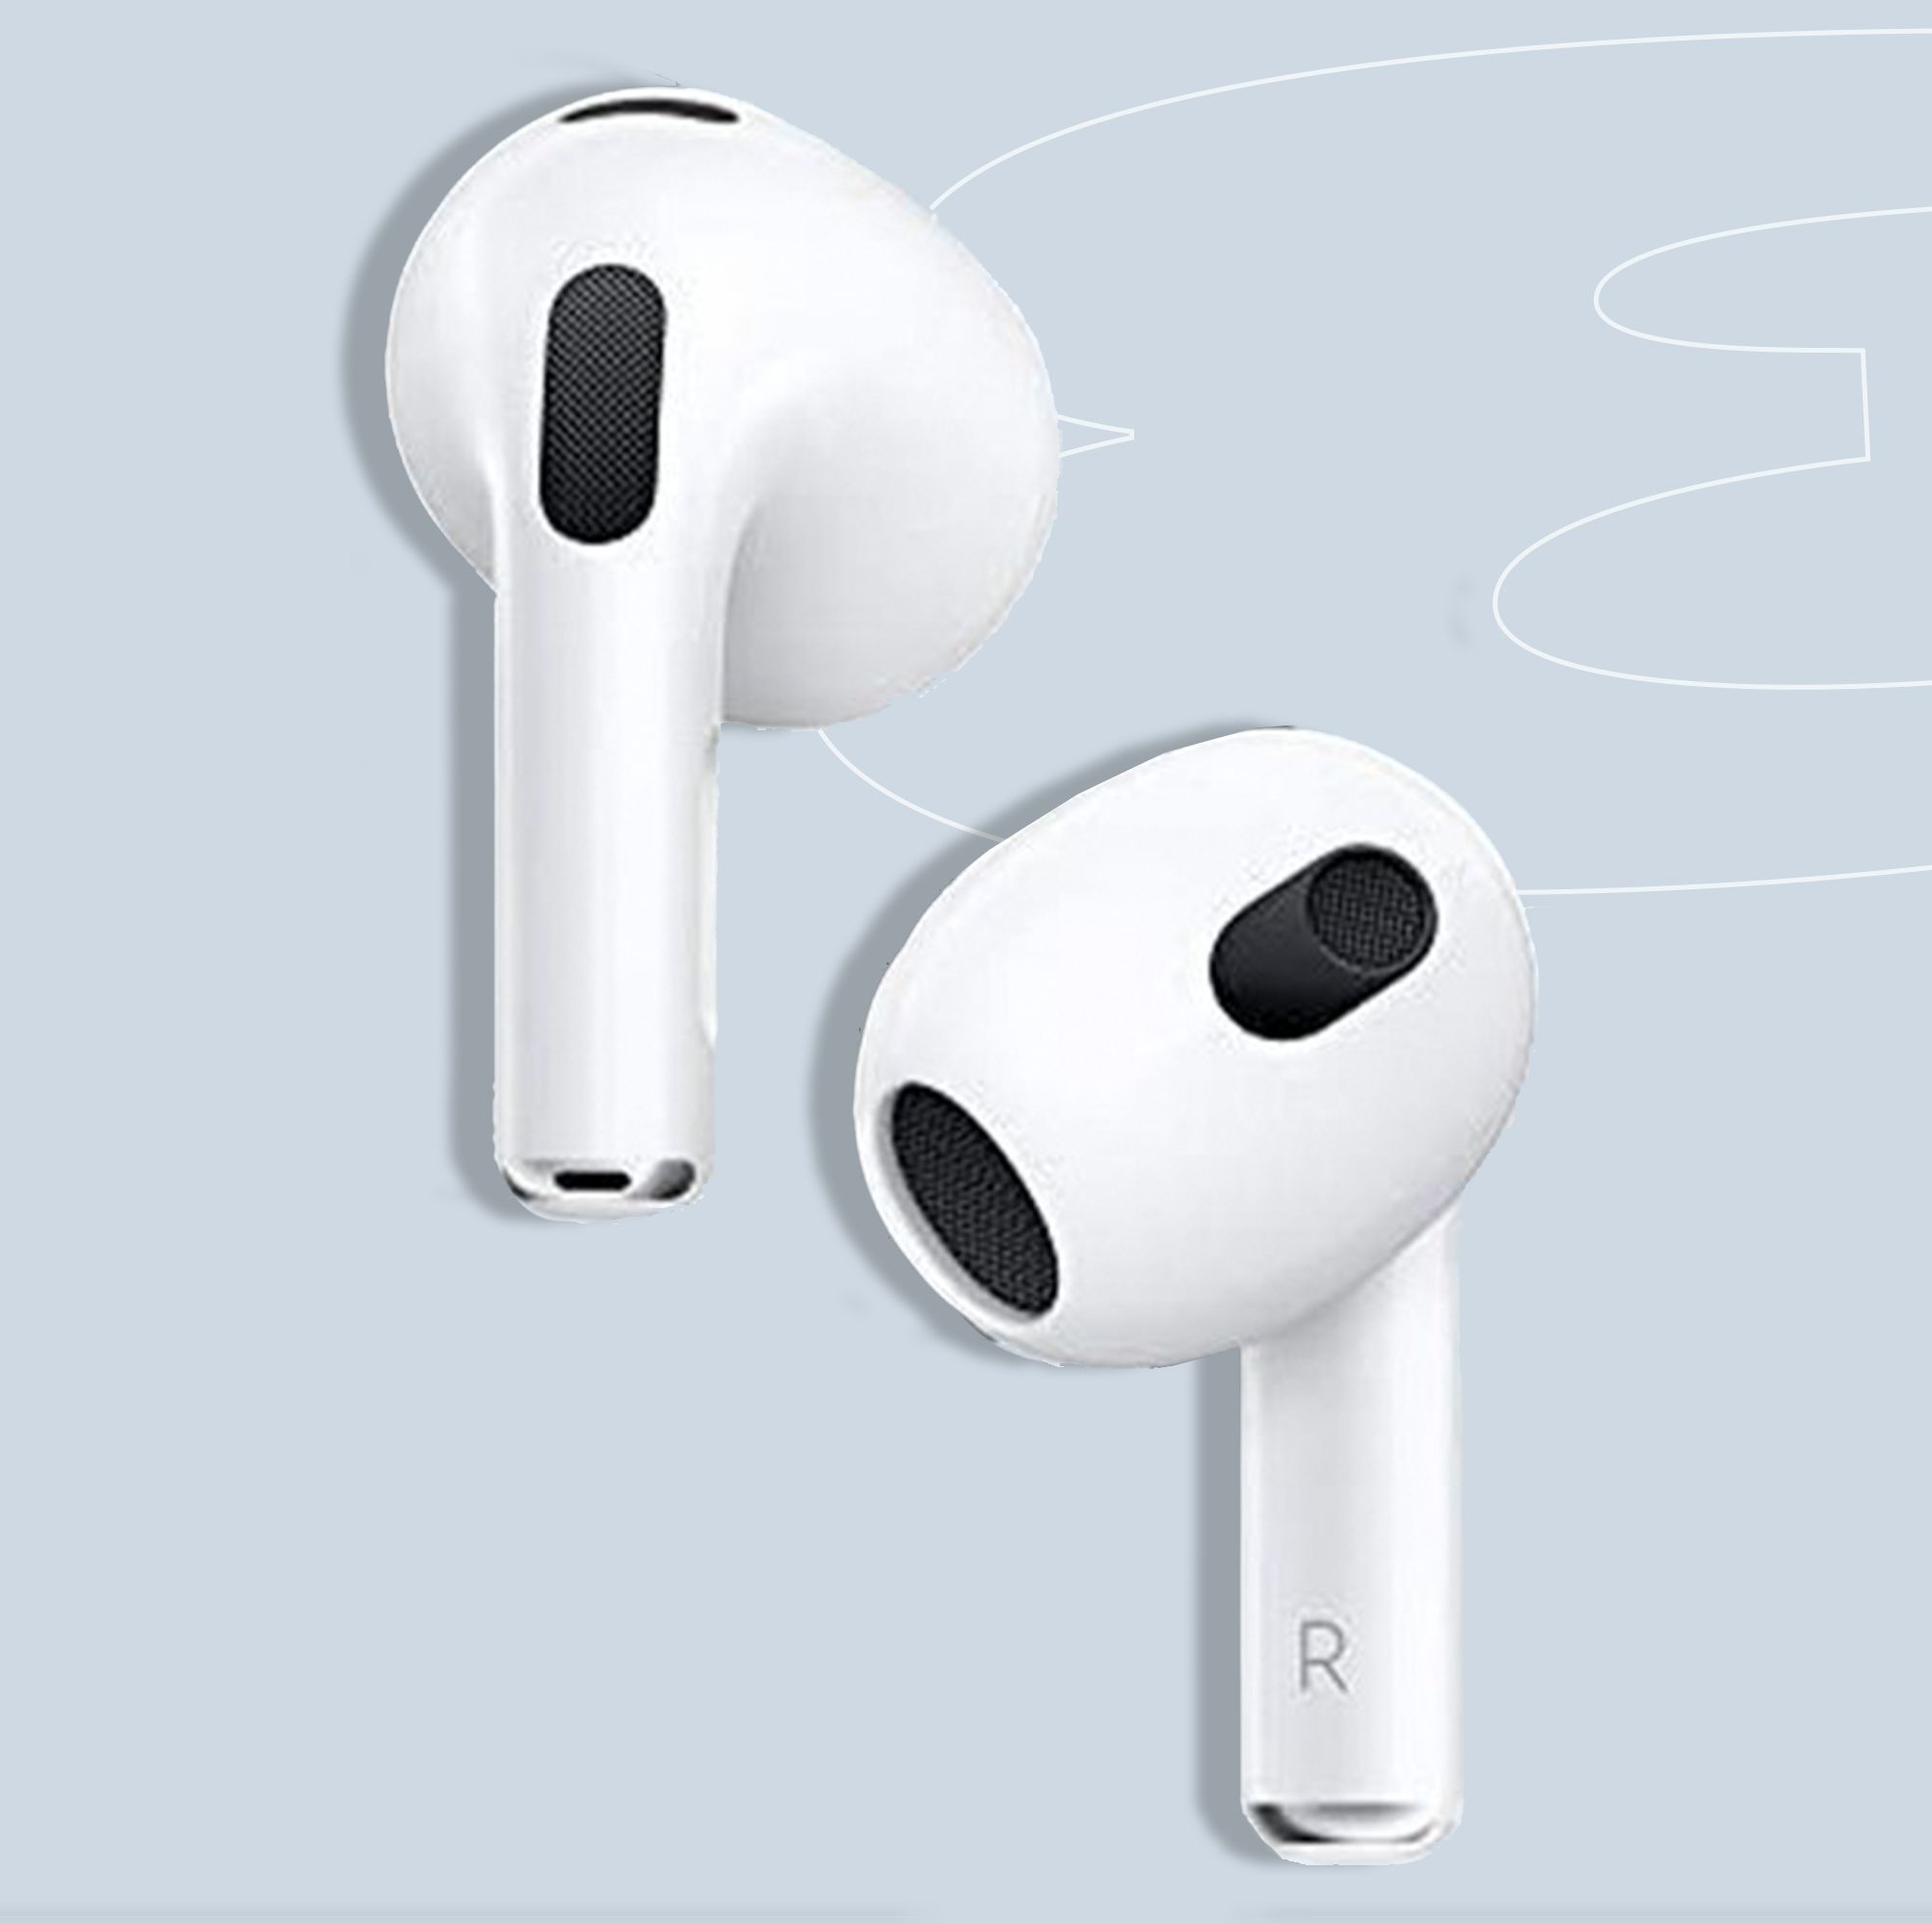 Every AirPods Model Is On Sale Right Now